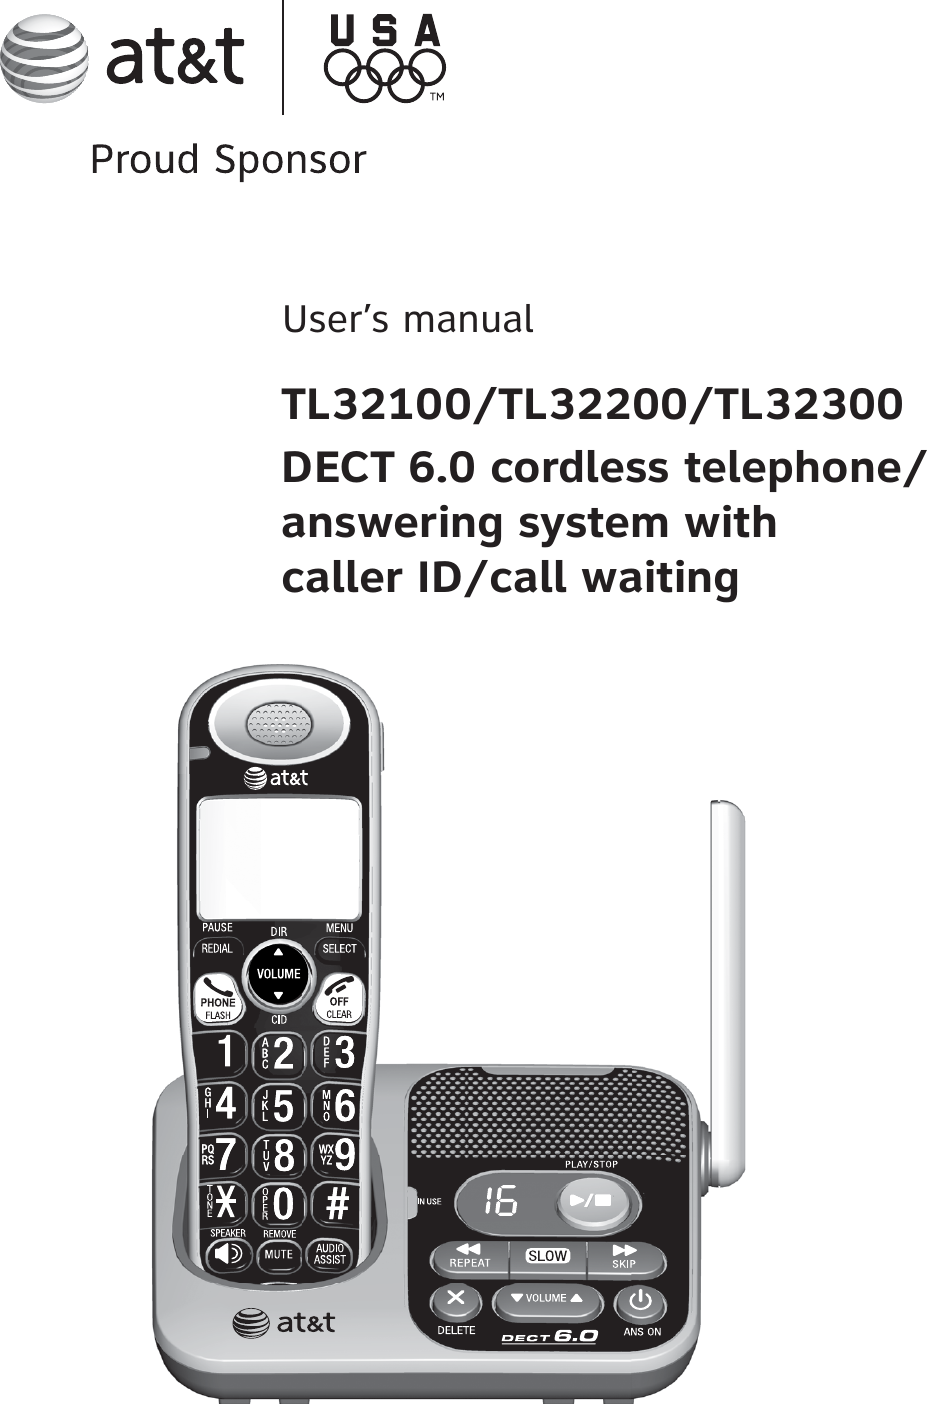 User’s manualTL32100/TL32200/TL32300DECT 6.0 cordless telephone/answering system with caller ID/call waiting